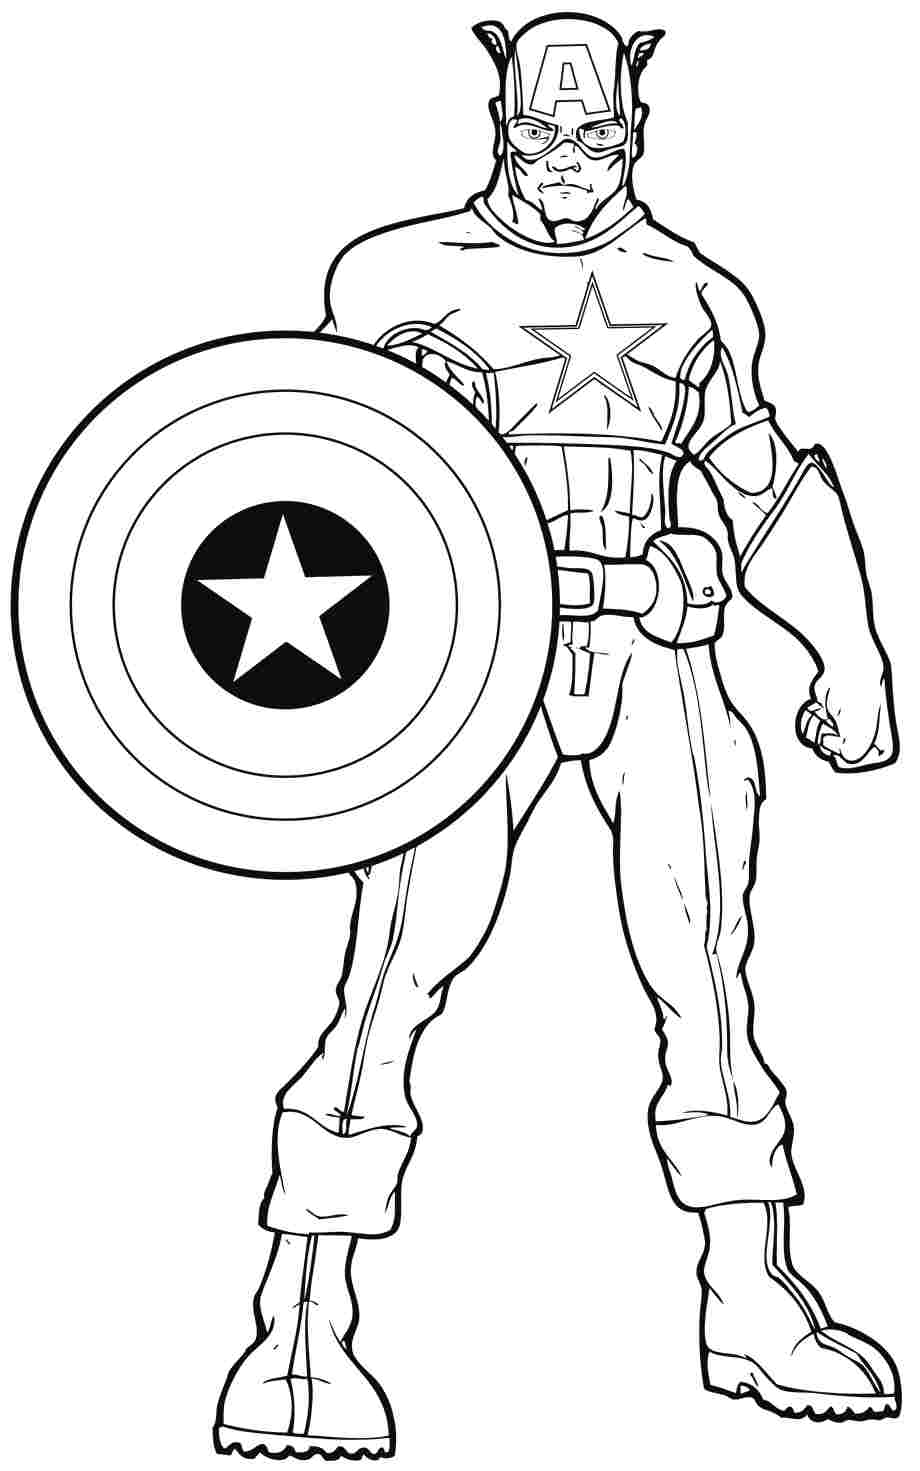 free-coloring-pages-of-superheroes-printables-download-free-coloring-pages-of-superheroes